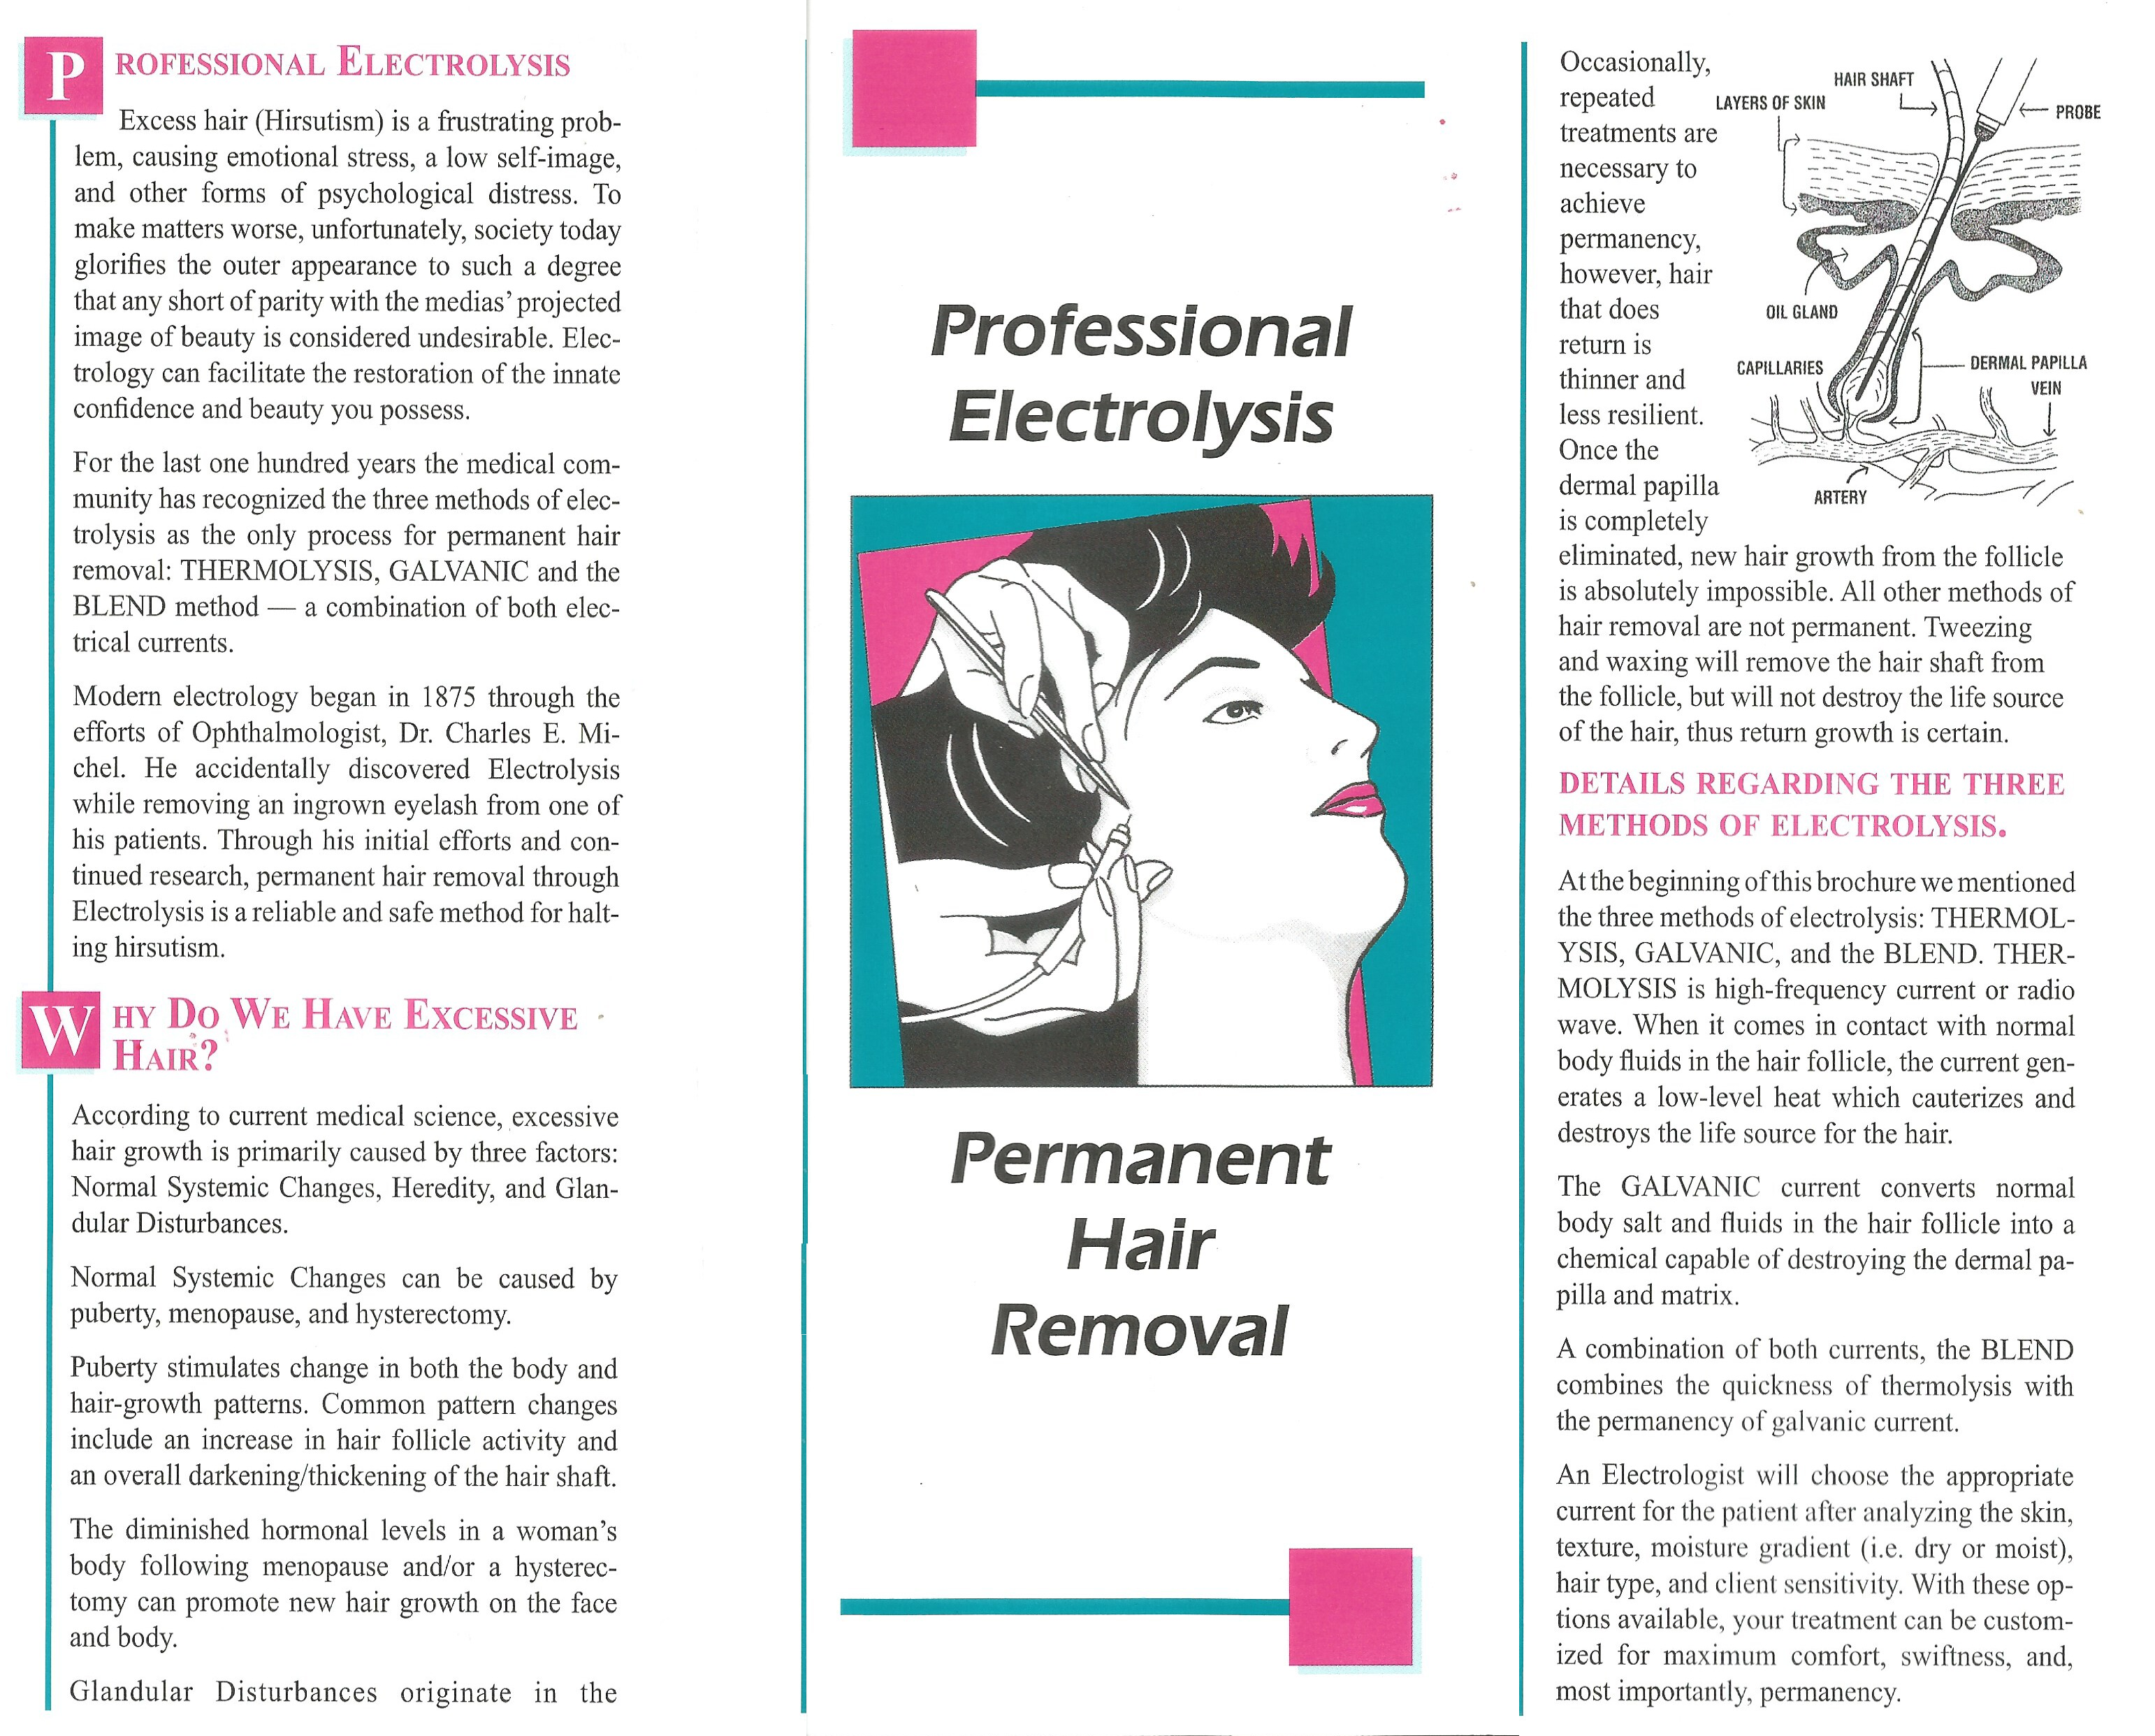 Professional Electrolysis Permanent Hair Removal Brochure